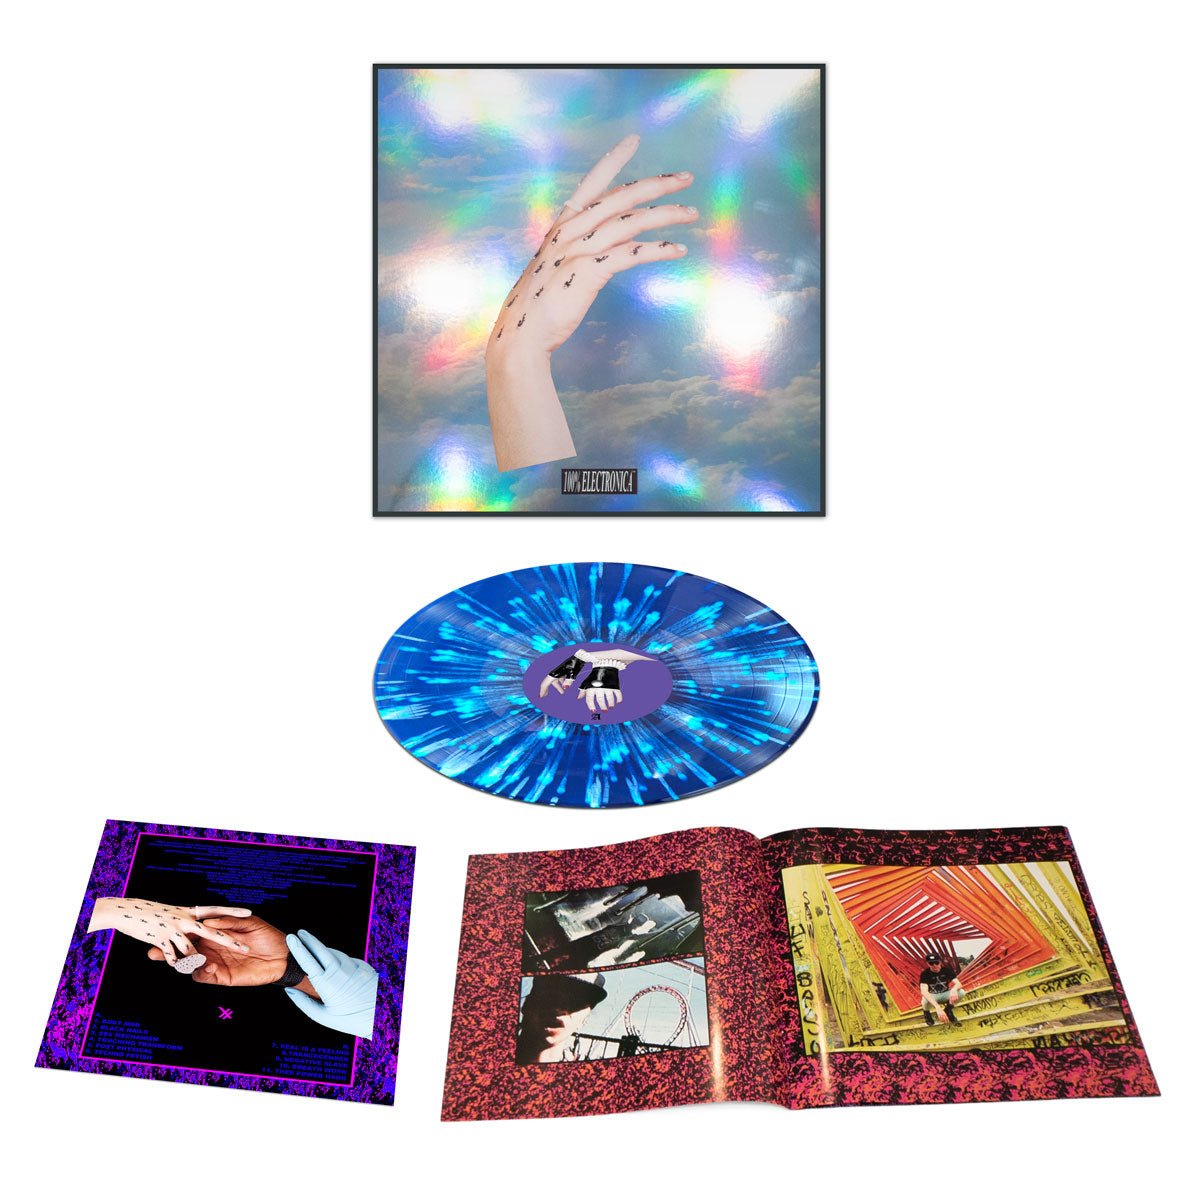 PICTUREPLANE - THEE PHYSICAL LP + T-Shirt Bundle - 100% Electronica Official Store (Photo 3)